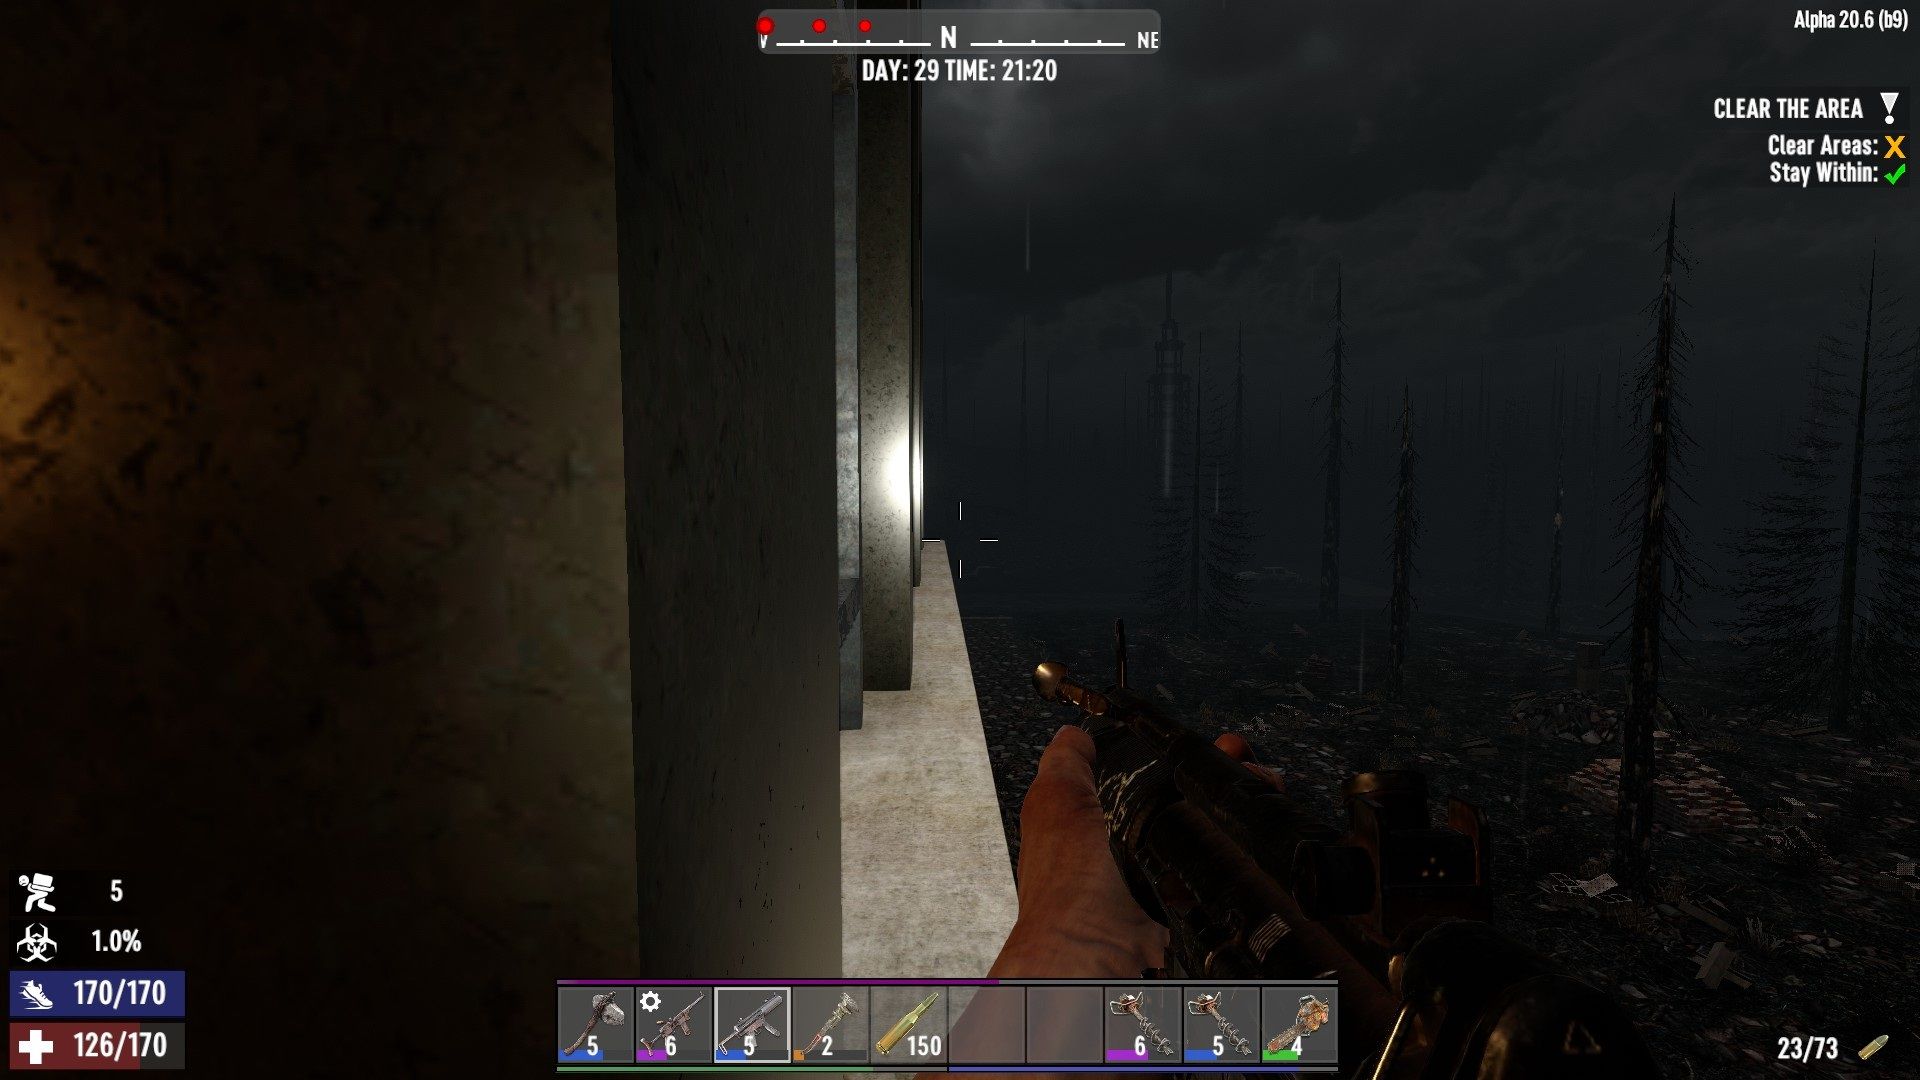 walking along a ledge to find a way back into the building Shotgun Messiah 7 Days To Die.jpg